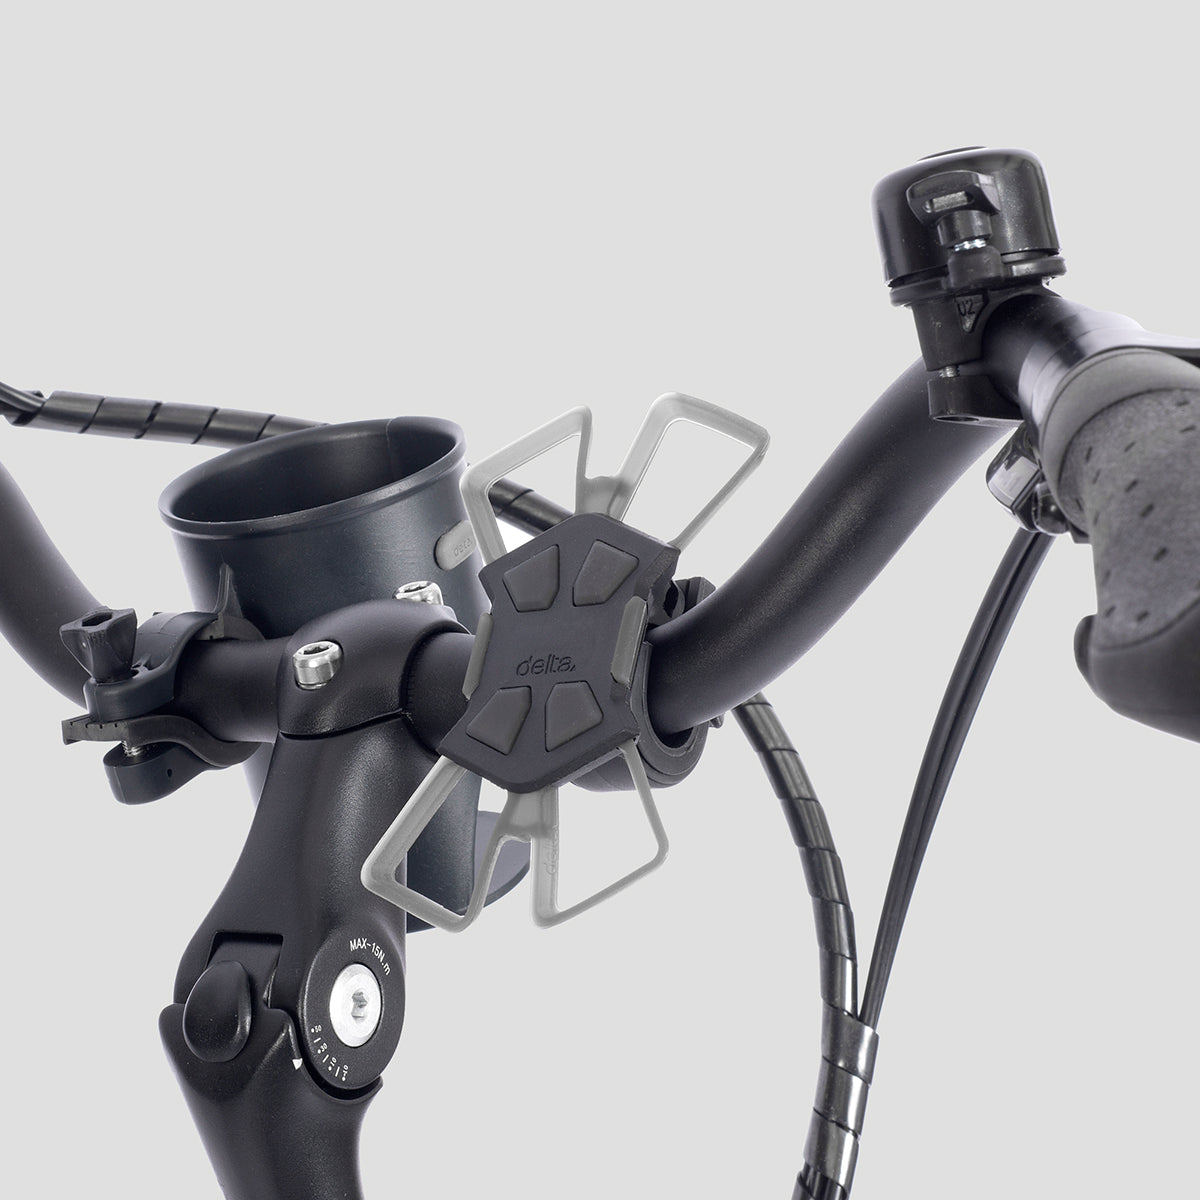 E-bike comes with two bonus accessories, mobile holder and beverage holder on gray background